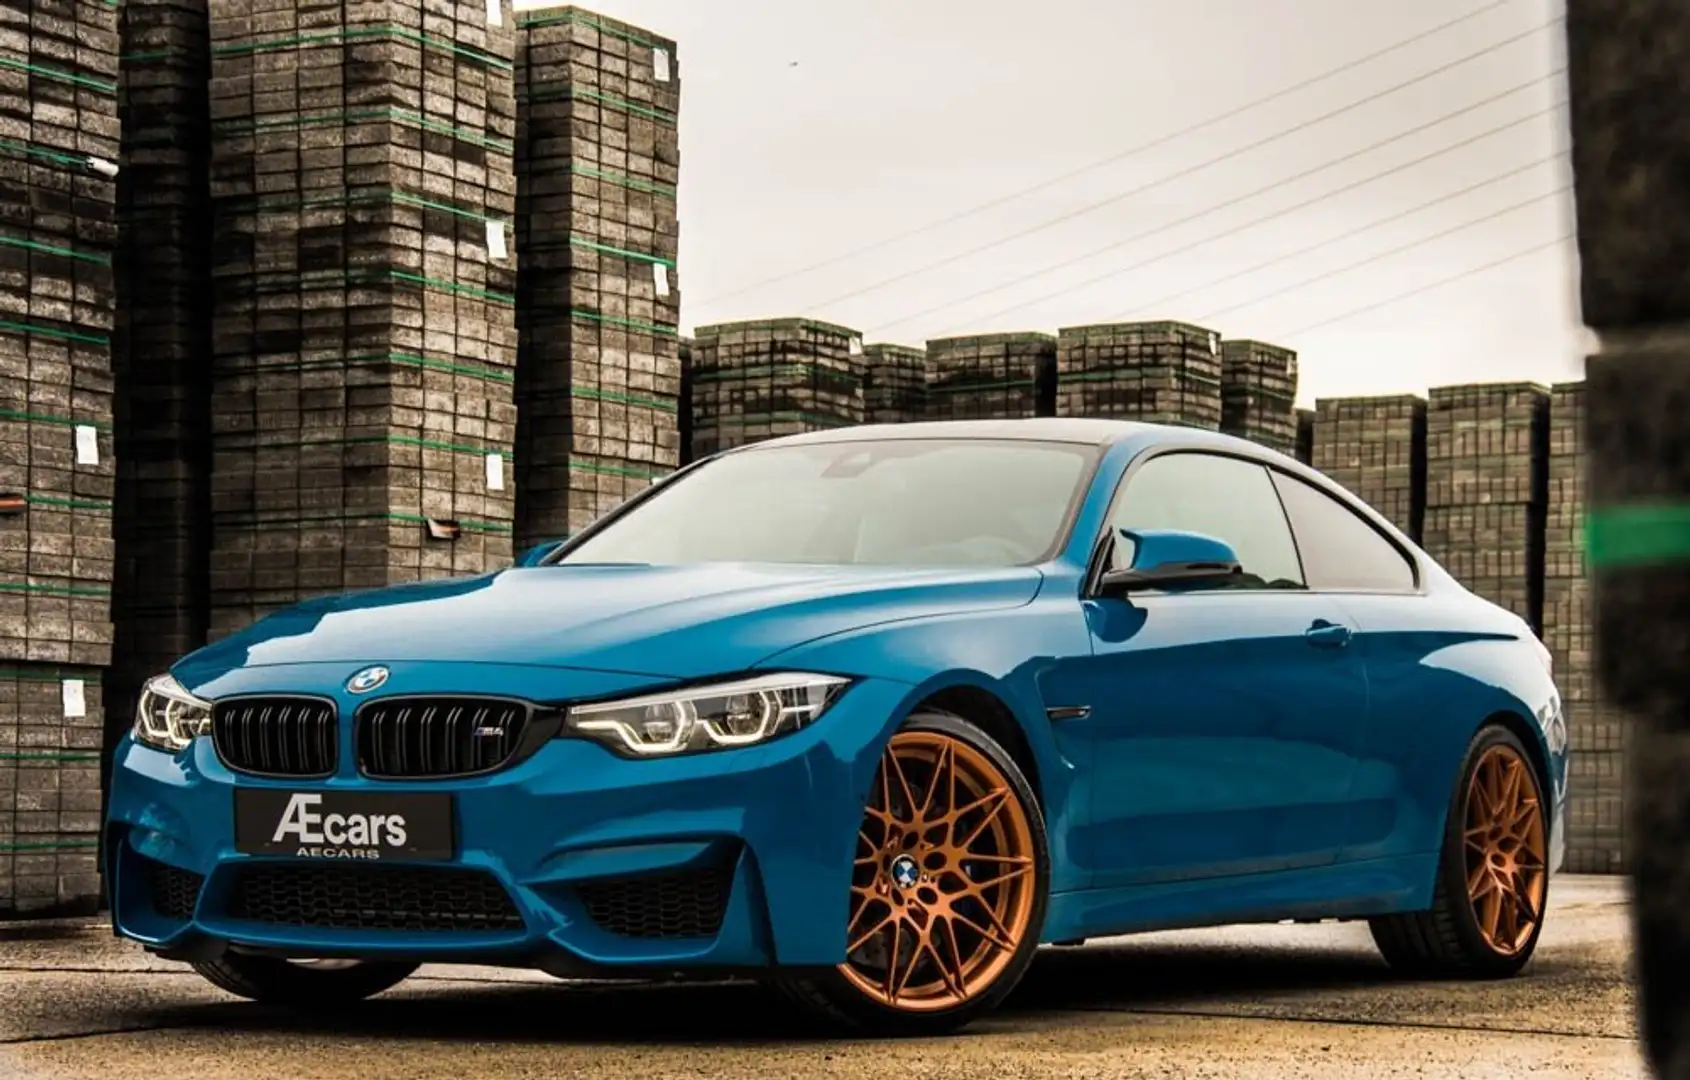 BMW M4 *** COMPETITION HERITAGE / LIMITED 1 OF 750 *** Blauw - 1